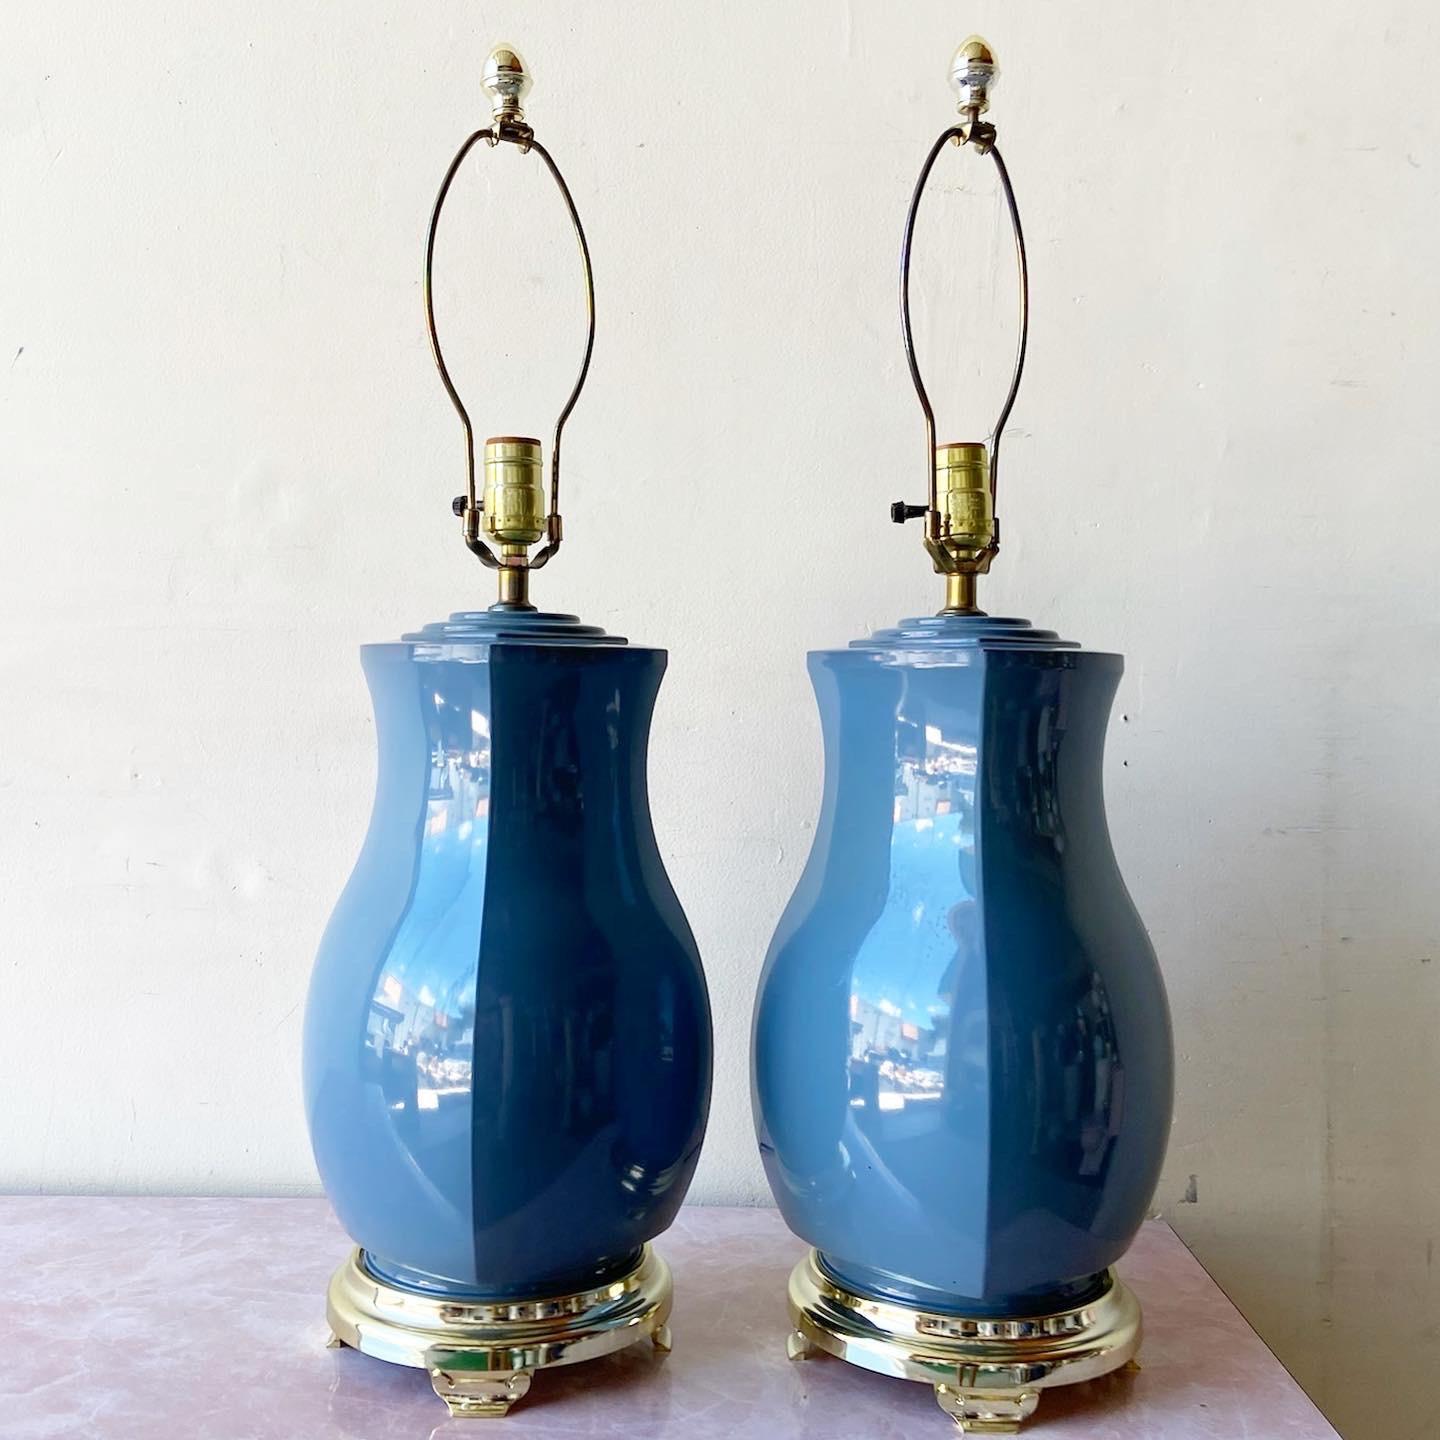 Stunning pair of postmodern porcelain table lamps. Body displays a 4 sided blue gloss.

3 way lighting
